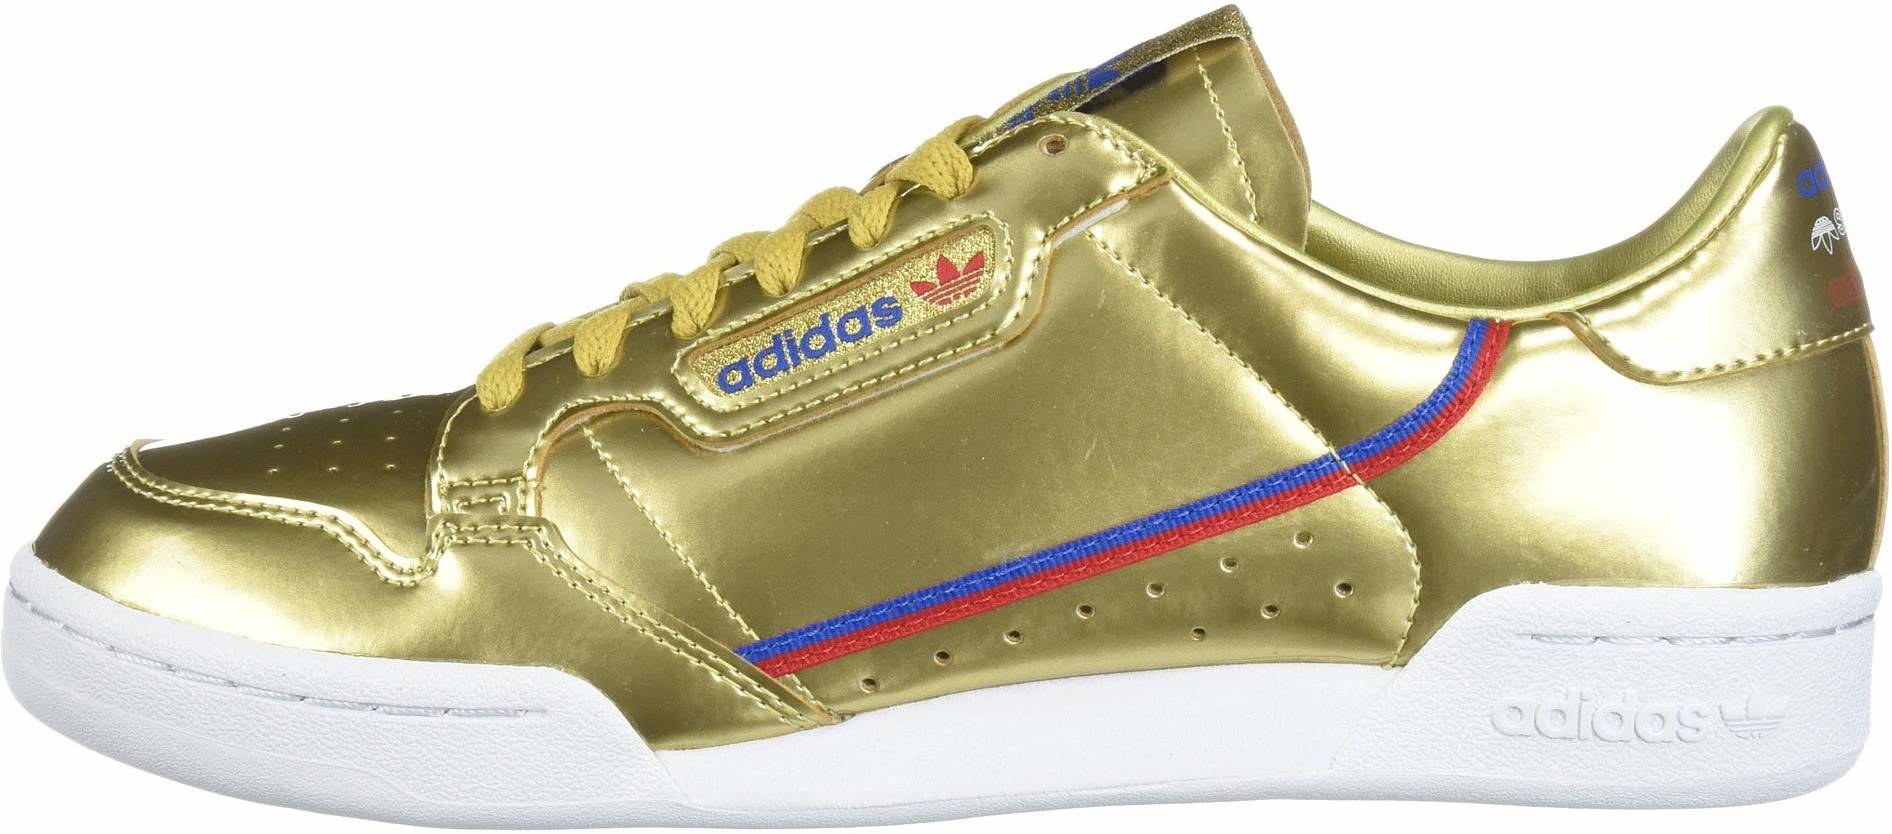 black and gold sneakers women's